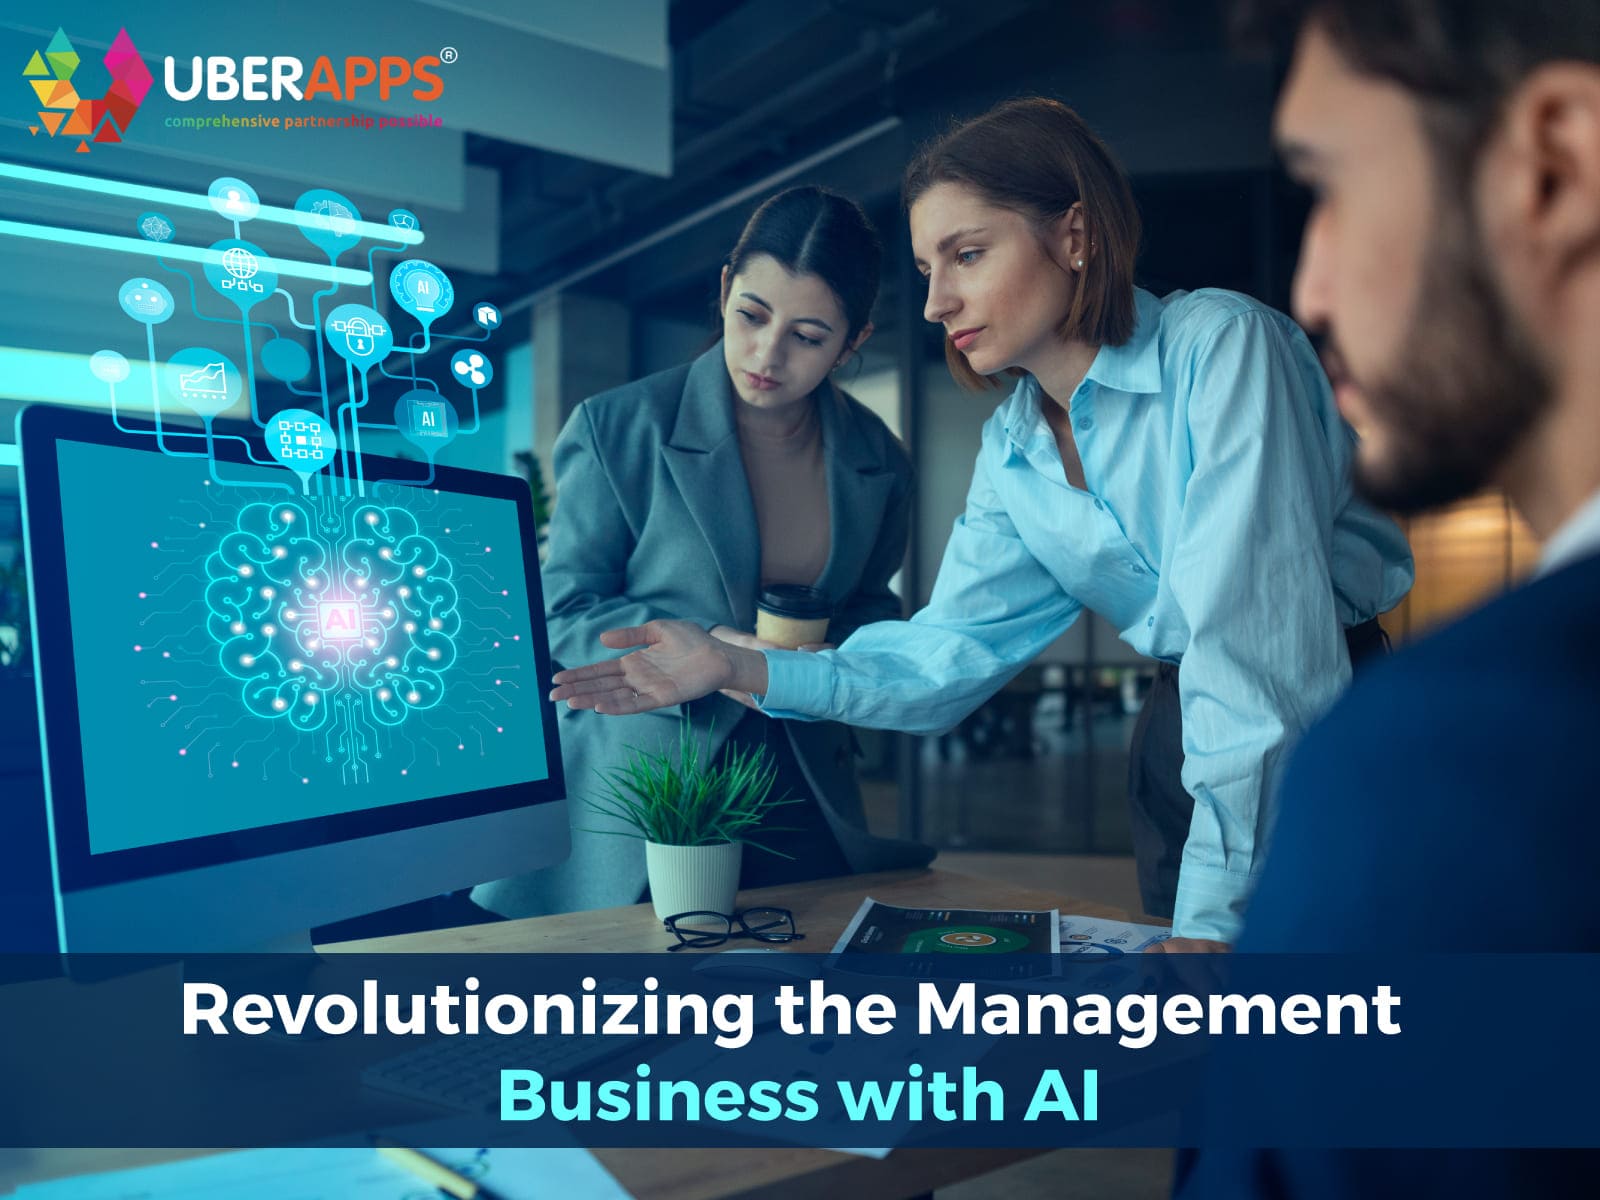 Revolutionizing the Management business with AI